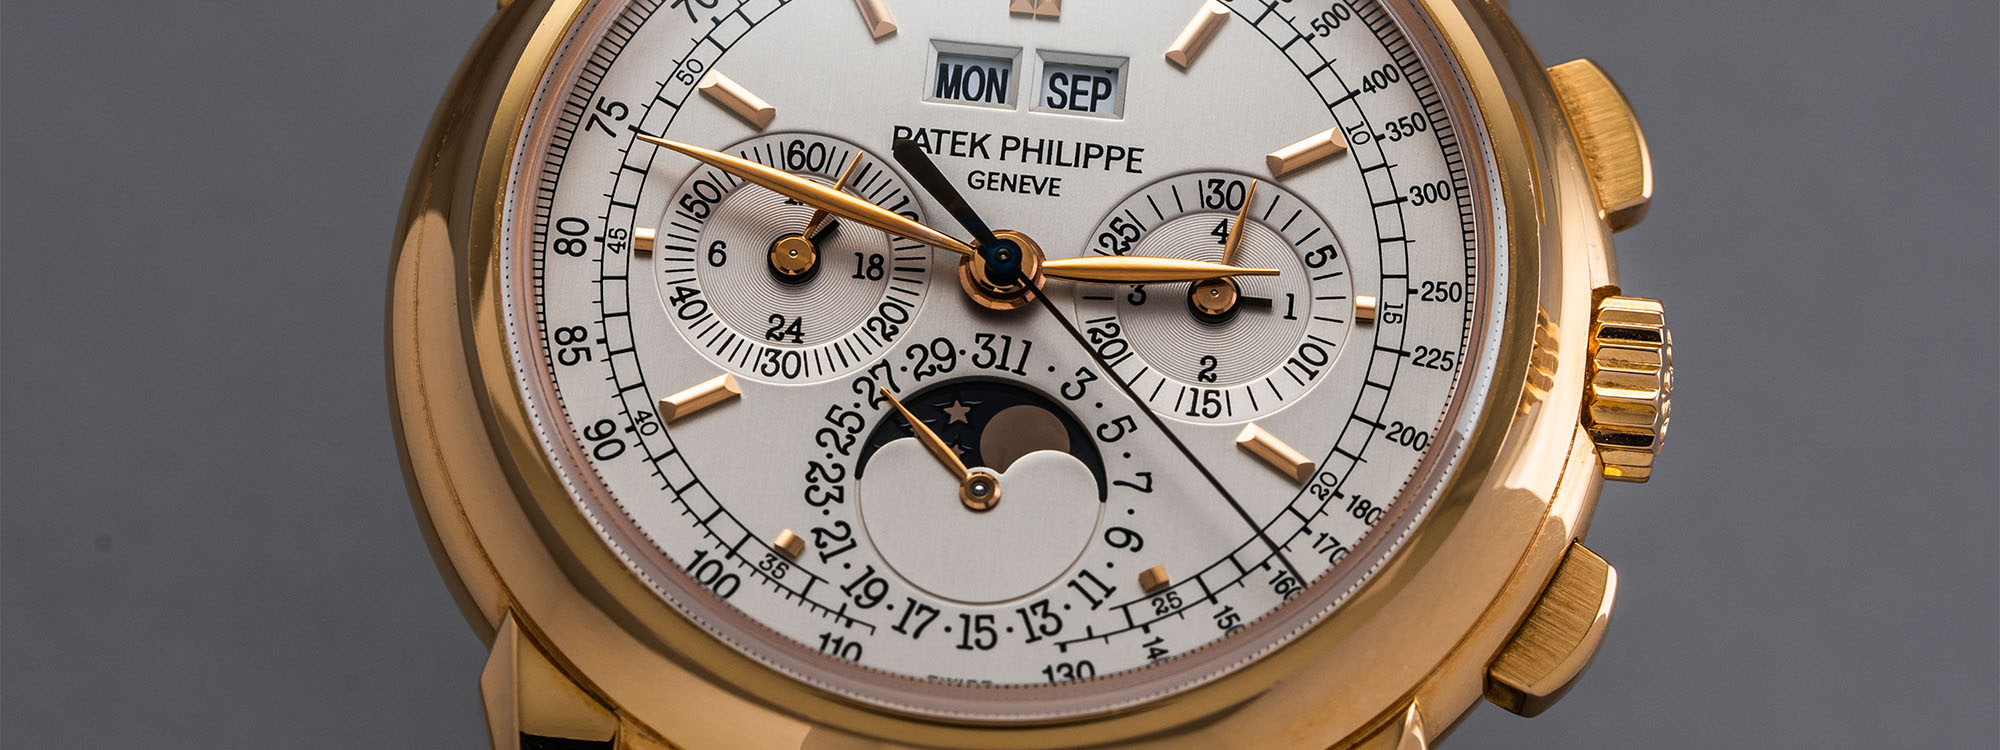 24 Perpetual Calendar Watches from The World's Leading Luxury Watchmakers